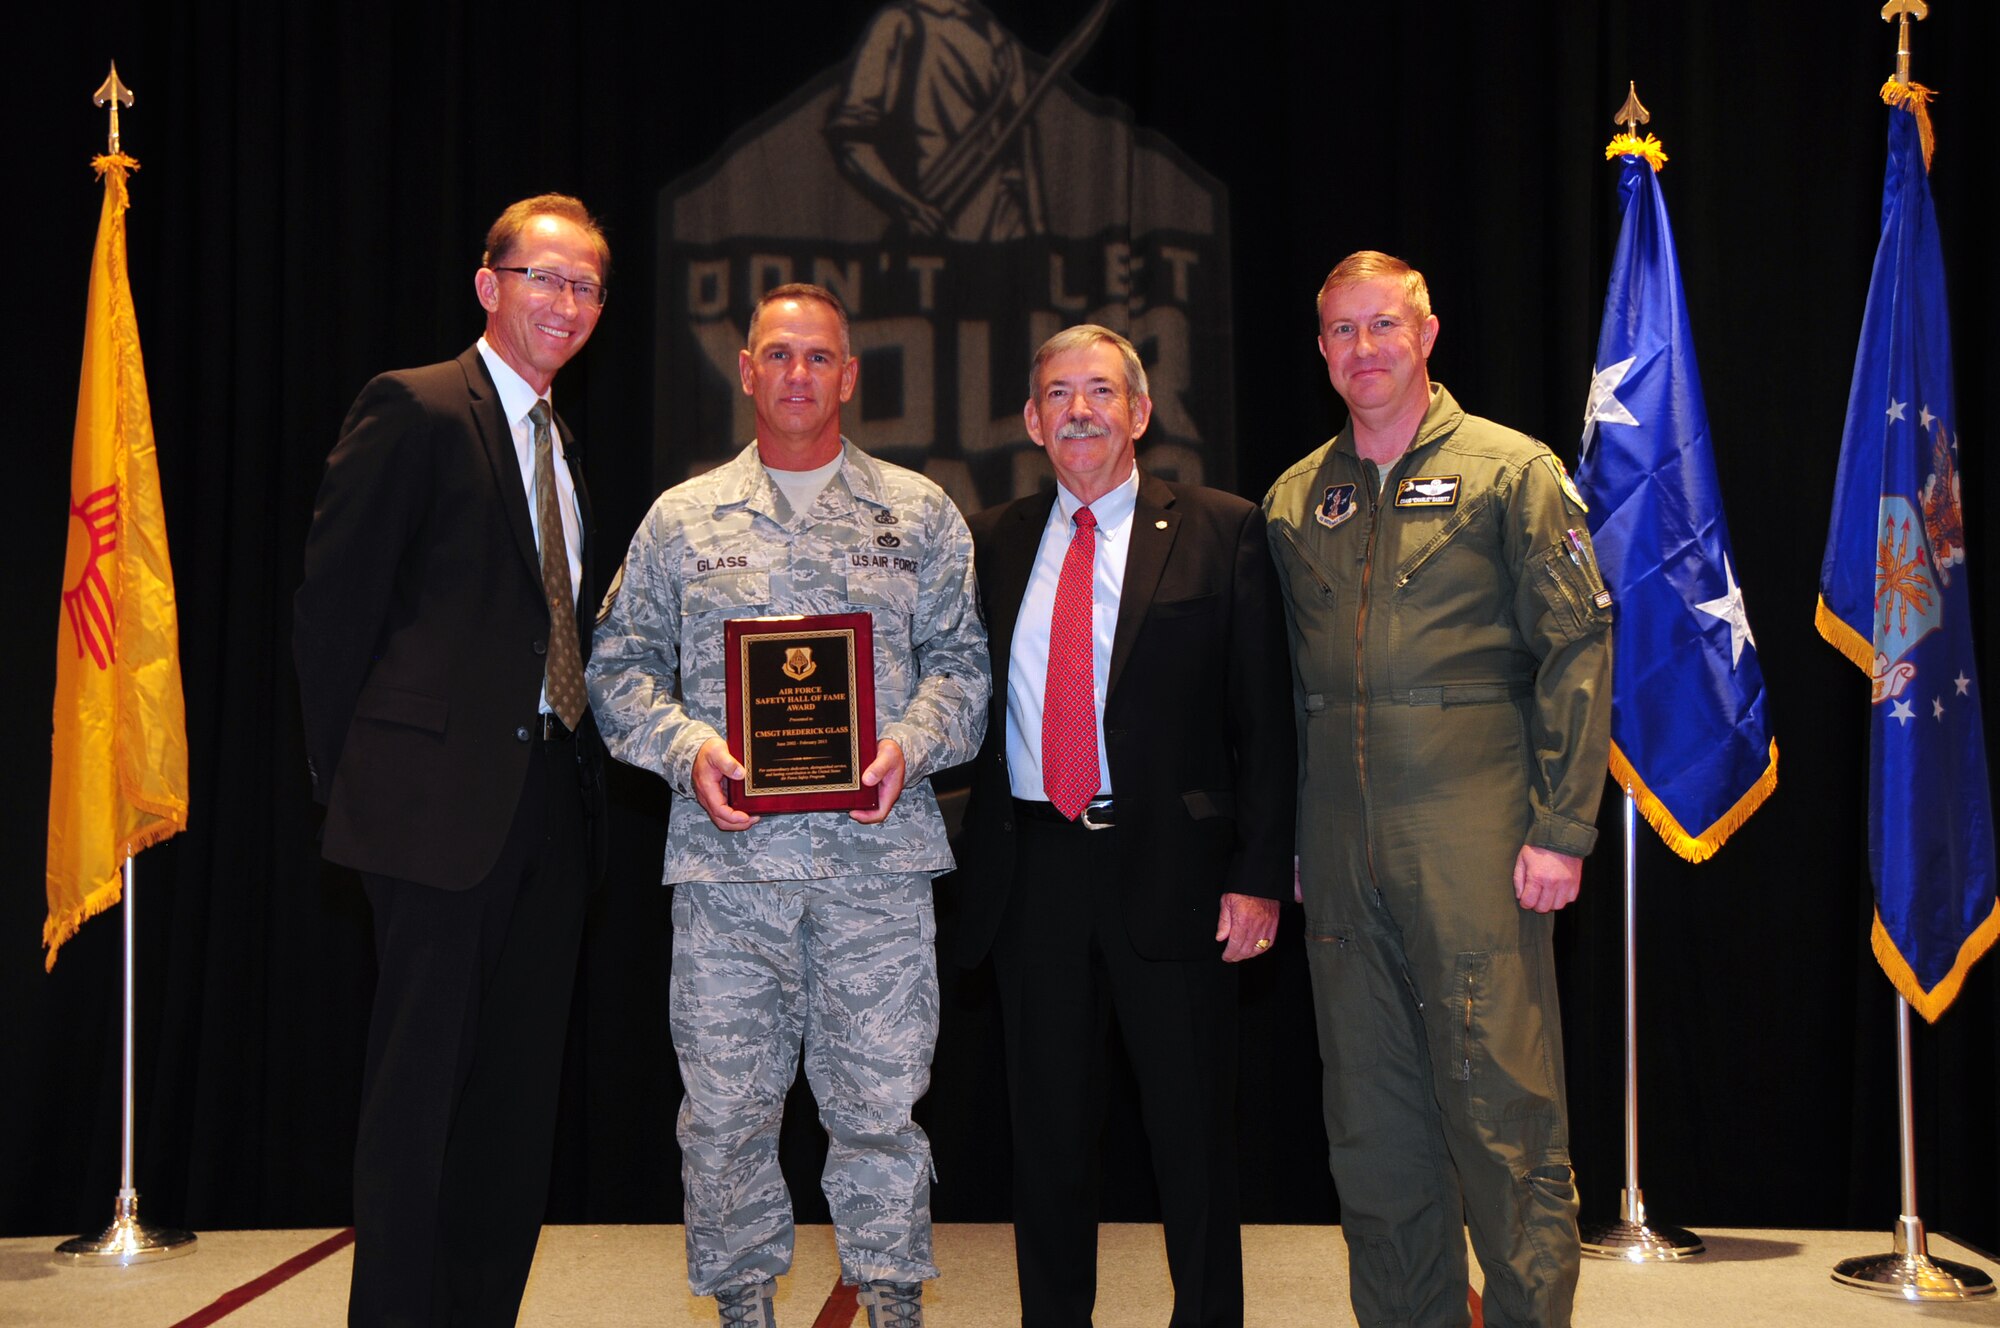 James Rubeor, Air Force Safety Center executive director; Bill Parsons, chief of Air Force ground safety; and Lt. Col. Craig Babbit, flight safety officer, present Chief Master Sgt. Frederick Glass, chief of Air National Guard occupational safety, the Air Force Safety Hall of Fame Award at the Albuquerque, New Mexico Mishap Prevention Workshop, May 12, 2015. Glass is the first enlisted ANG member to receive the award since its inception in 1977. (U.S. Air National Guard photo by Master Sgt. Paula Aragon)